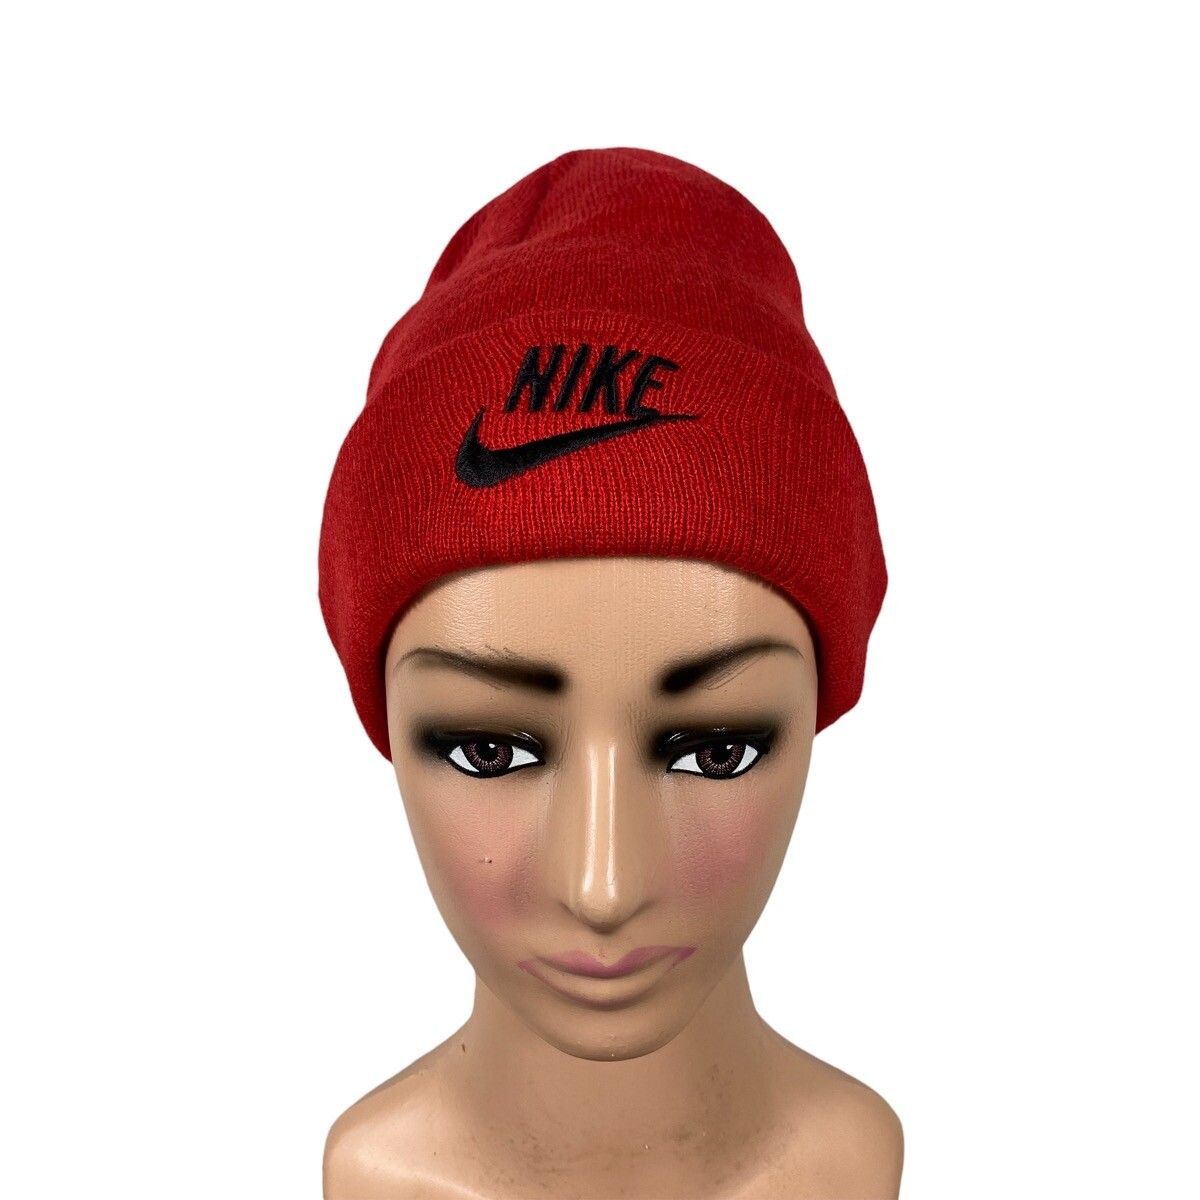 Vintage 90s Nike Embroidery Beanie Unisex Red Colour - 1